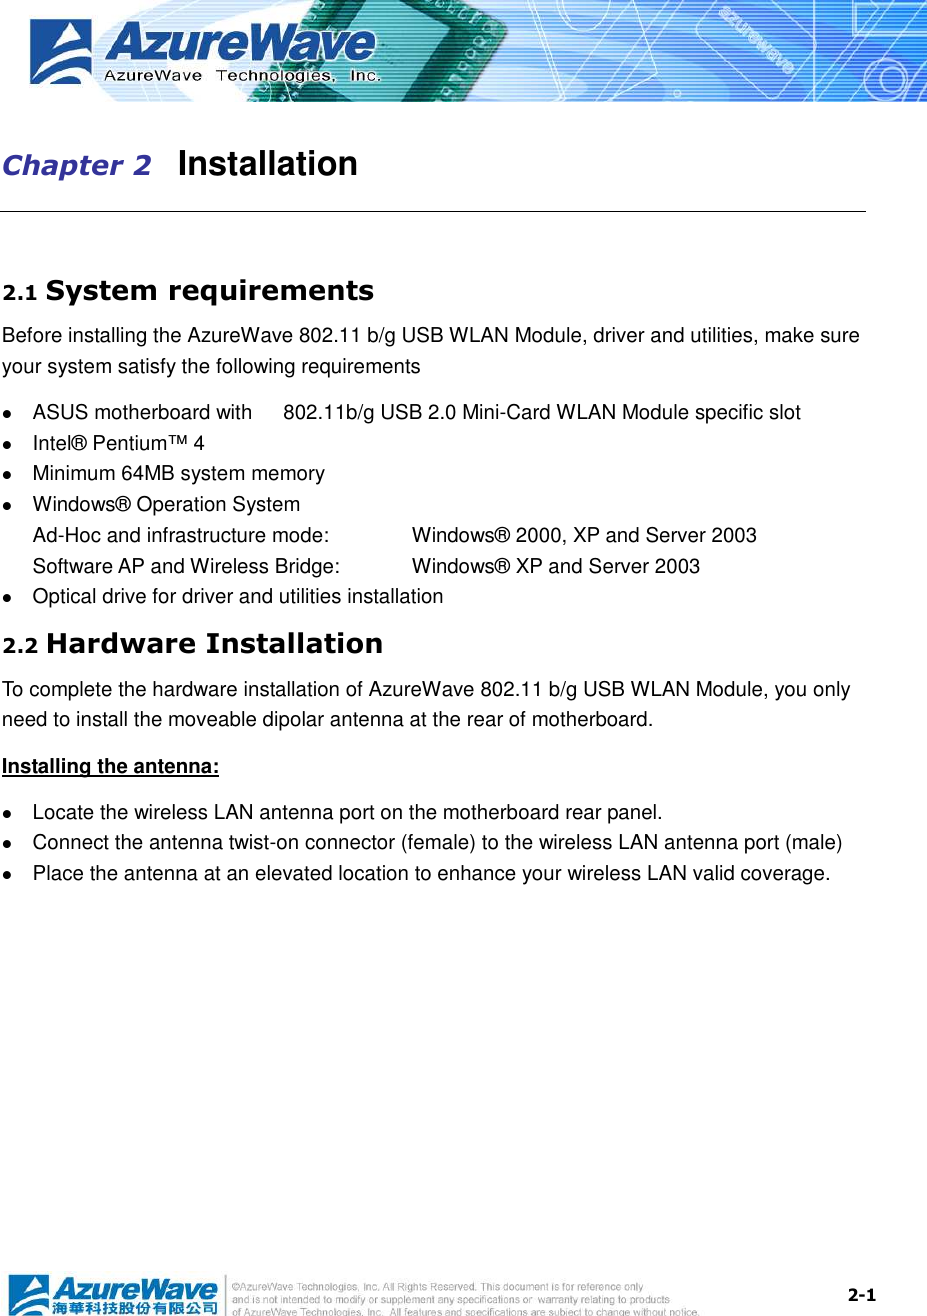  2-1 Chapter 2   Installation  2.1 System requirements Before installing the AzureWave 802.11 b/g USB WLAN Module, driver and utilities, make sure your system satisfy the following requirements  ASUS motherboard with      802.11b/g USB 2.0 Mini-Card WLAN Module specific slot  Intel® Pentium™ 4  Minimum 64MB system memory  Windows® Operation System Ad-Hoc and infrastructure mode:      Windows® 2000, XP and Server 2003 Software AP and Wireless Bridge:    Windows® XP and Server 2003  Optical drive for driver and utilities installation 2.2 Hardware Installation To complete the hardware installation of AzureWave 802.11 b/g USB WLAN Module, you only need to install the moveable dipolar antenna at the rear of motherboard. Installing the antenna:  Locate the wireless LAN antenna port on the motherboard rear panel.    Connect the antenna twist-on connector (female) to the wireless LAN antenna port (male)  Place the antenna at an elevated location to enhance your wireless LAN valid coverage.    